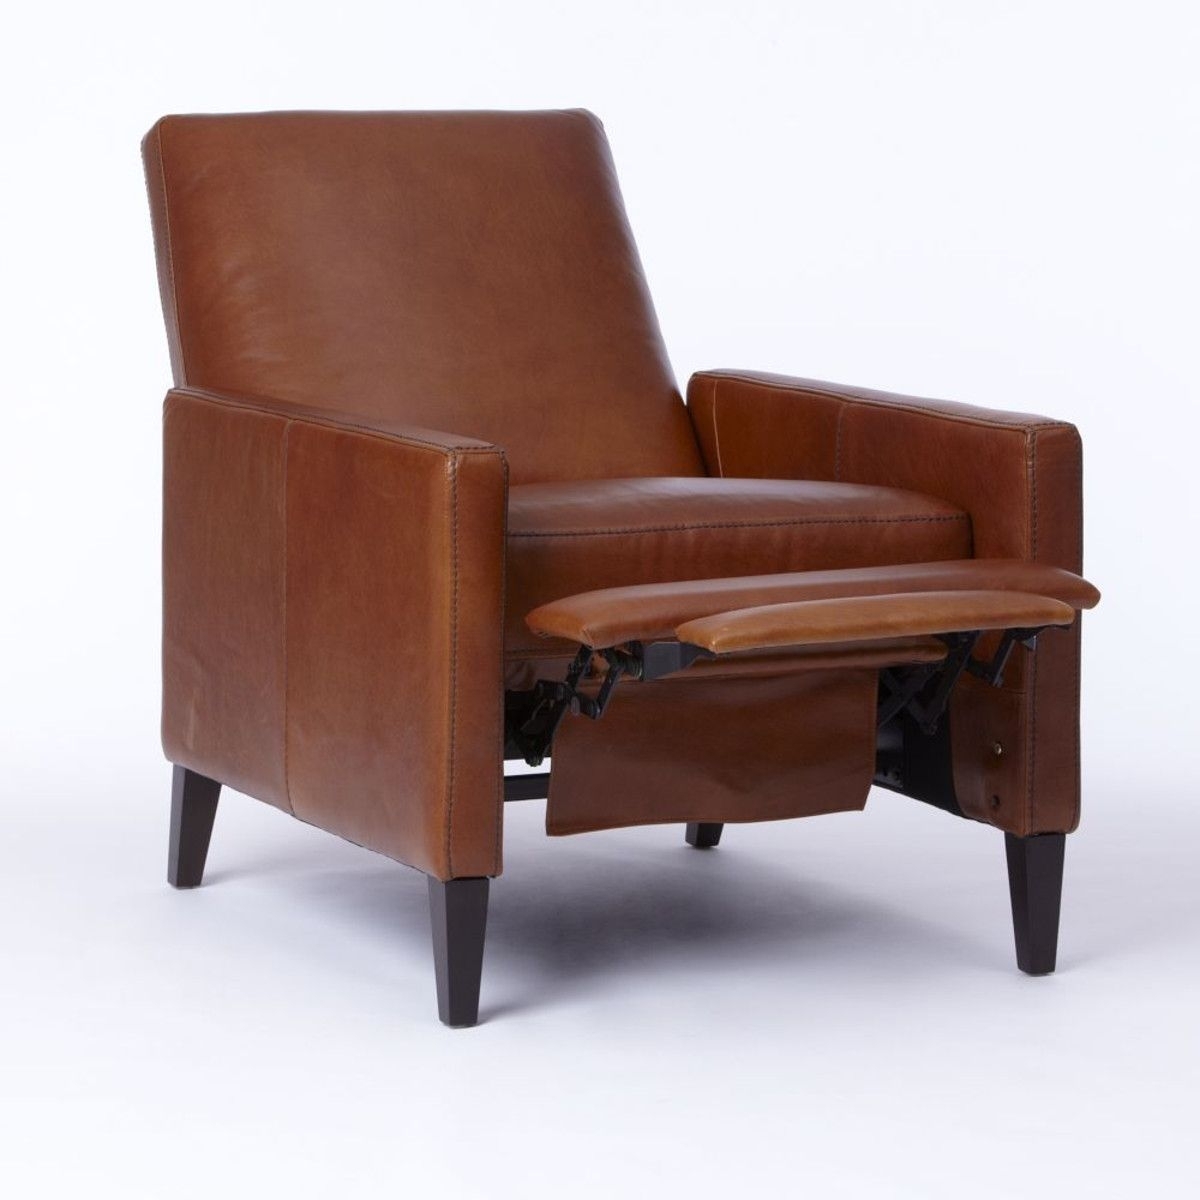 Where To Find West Elm's Sedgwick Leather Recliner For Cheap